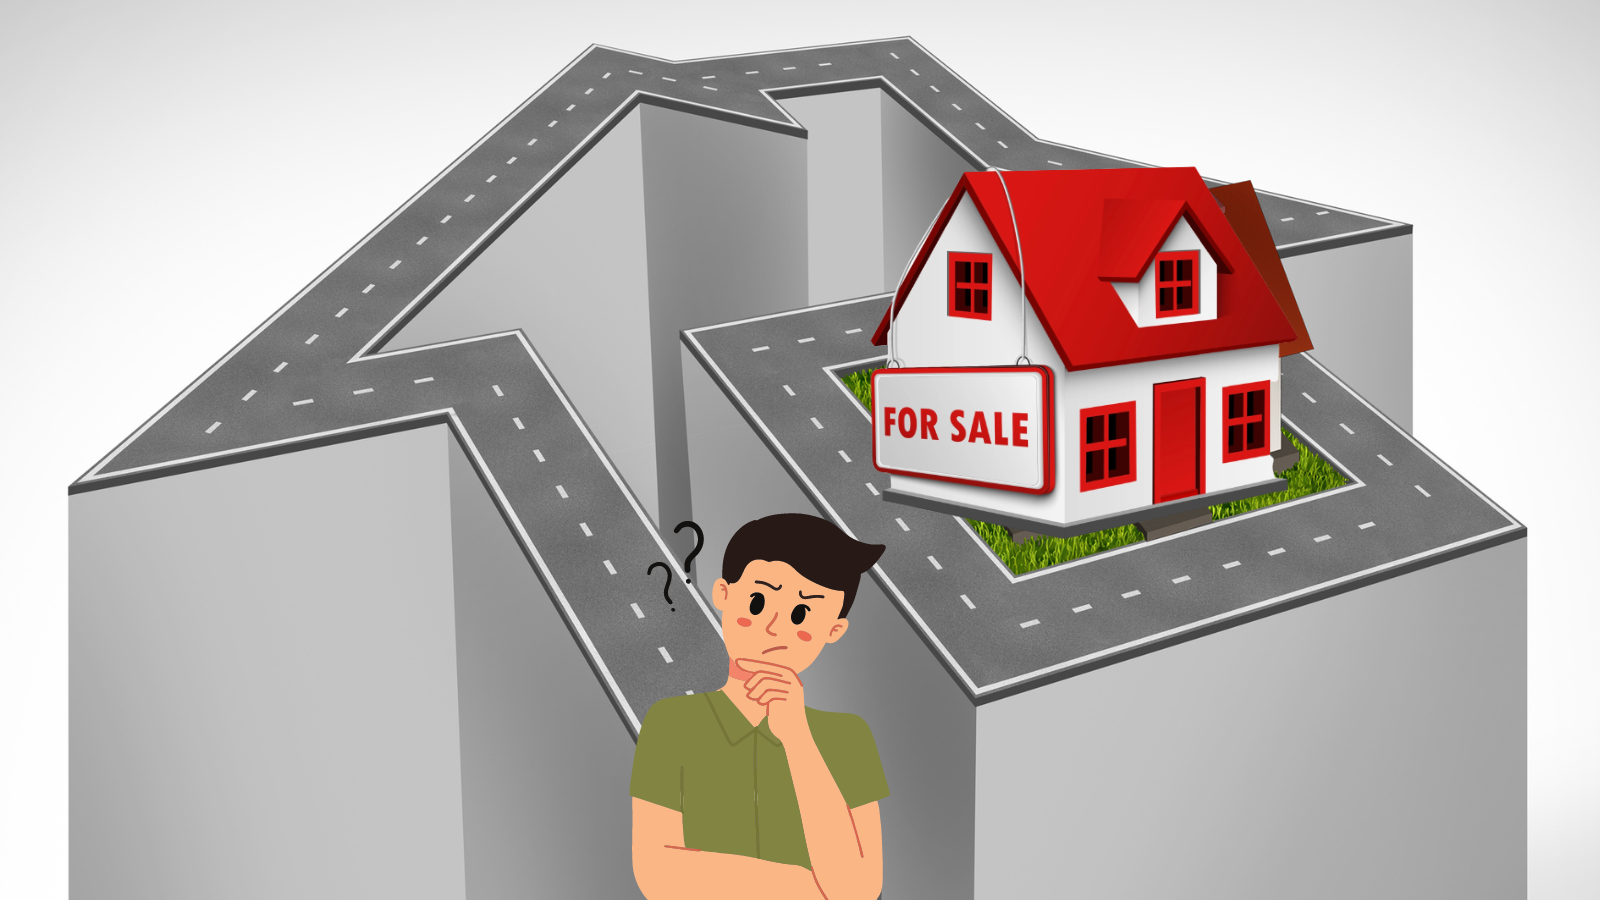 Selling A House With Challenges? Know Your Options